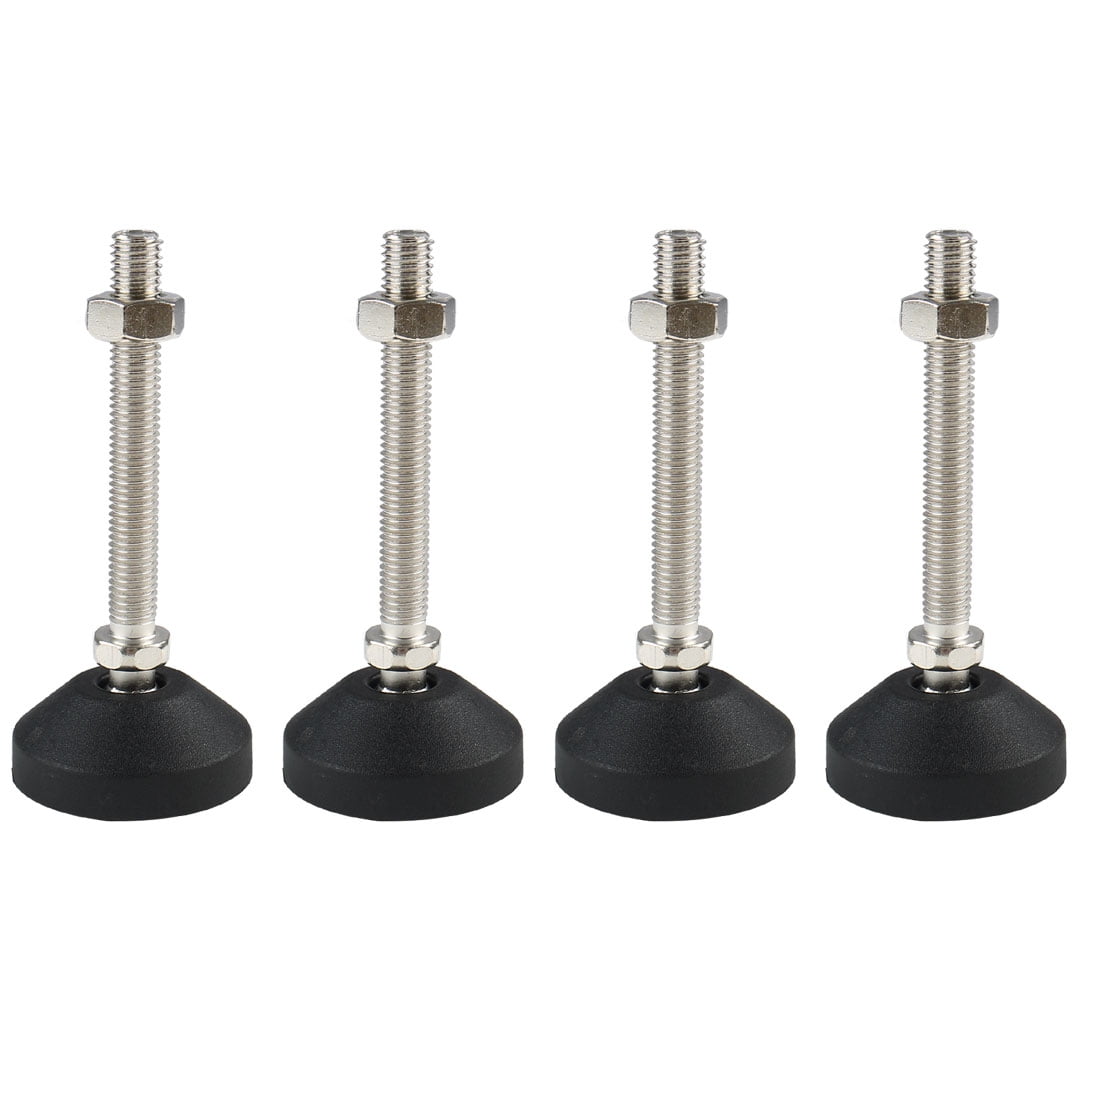 Base Diameter 2.2 Inch LTD Machine Cabinet & Heavy Duty Applications 2-Pack Guangzhou Openfind Electronic Commerce CO 1000 LB Capacity for Workbench Antrader M12x100mm Adjustable Leg Leveler Carbon Steel Shockproof Self Leveling Feet